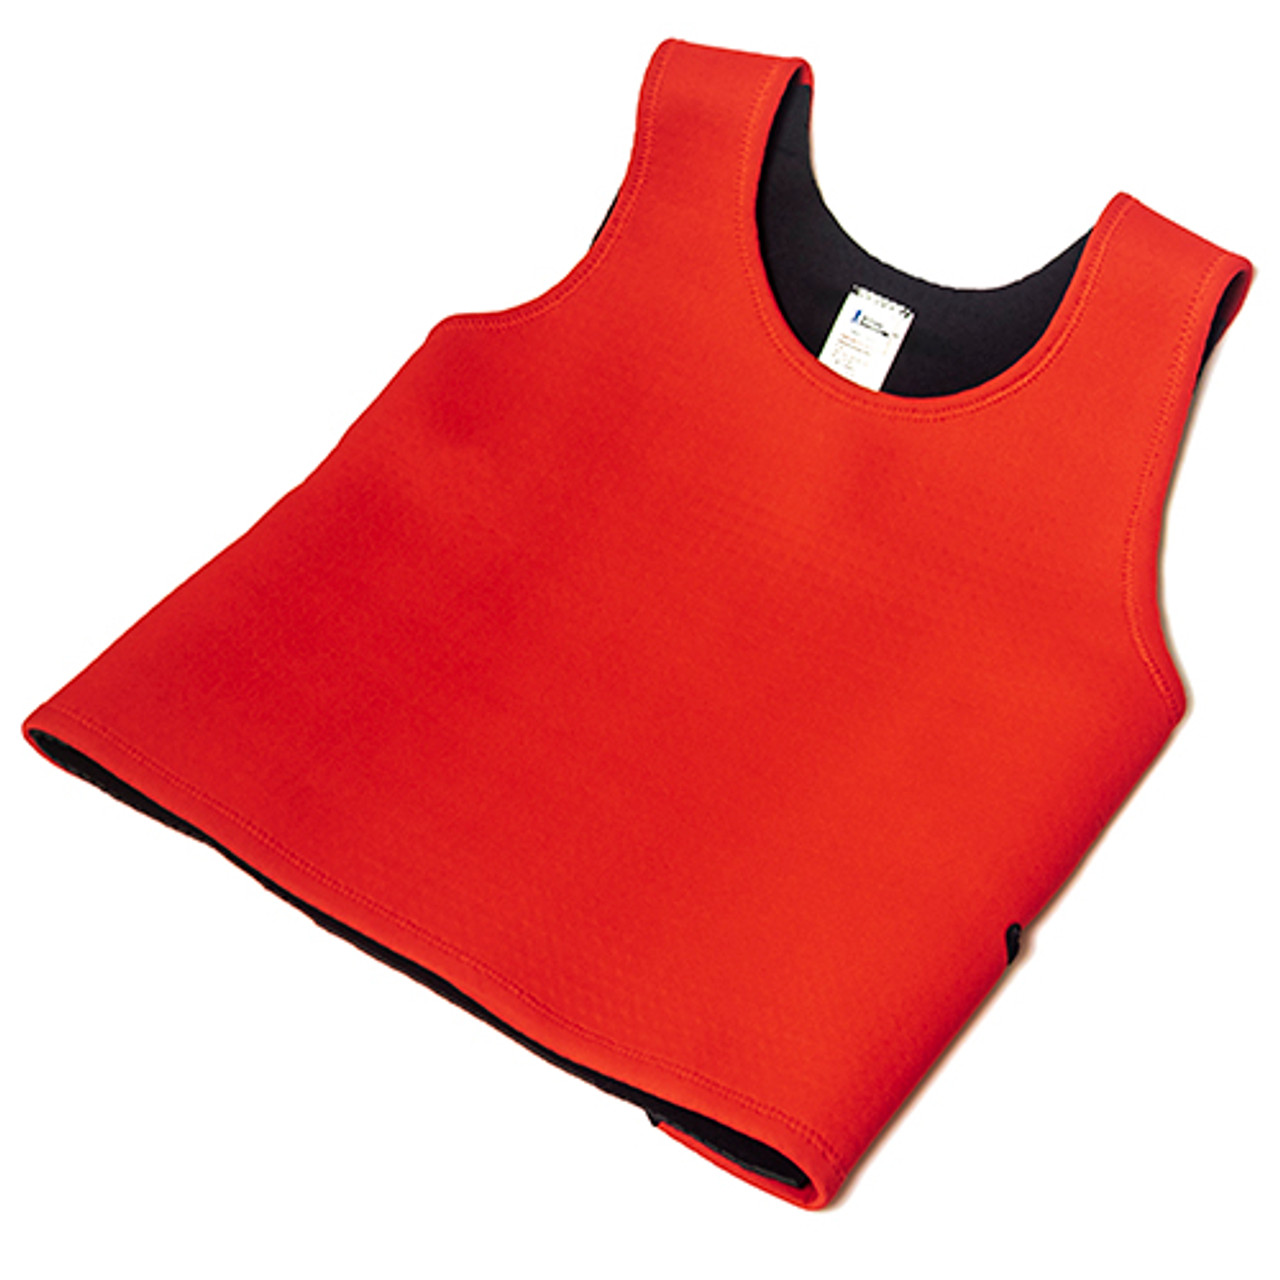 Pressure Vest- Soothing Deep Pressure for Kids and Adults with Autism